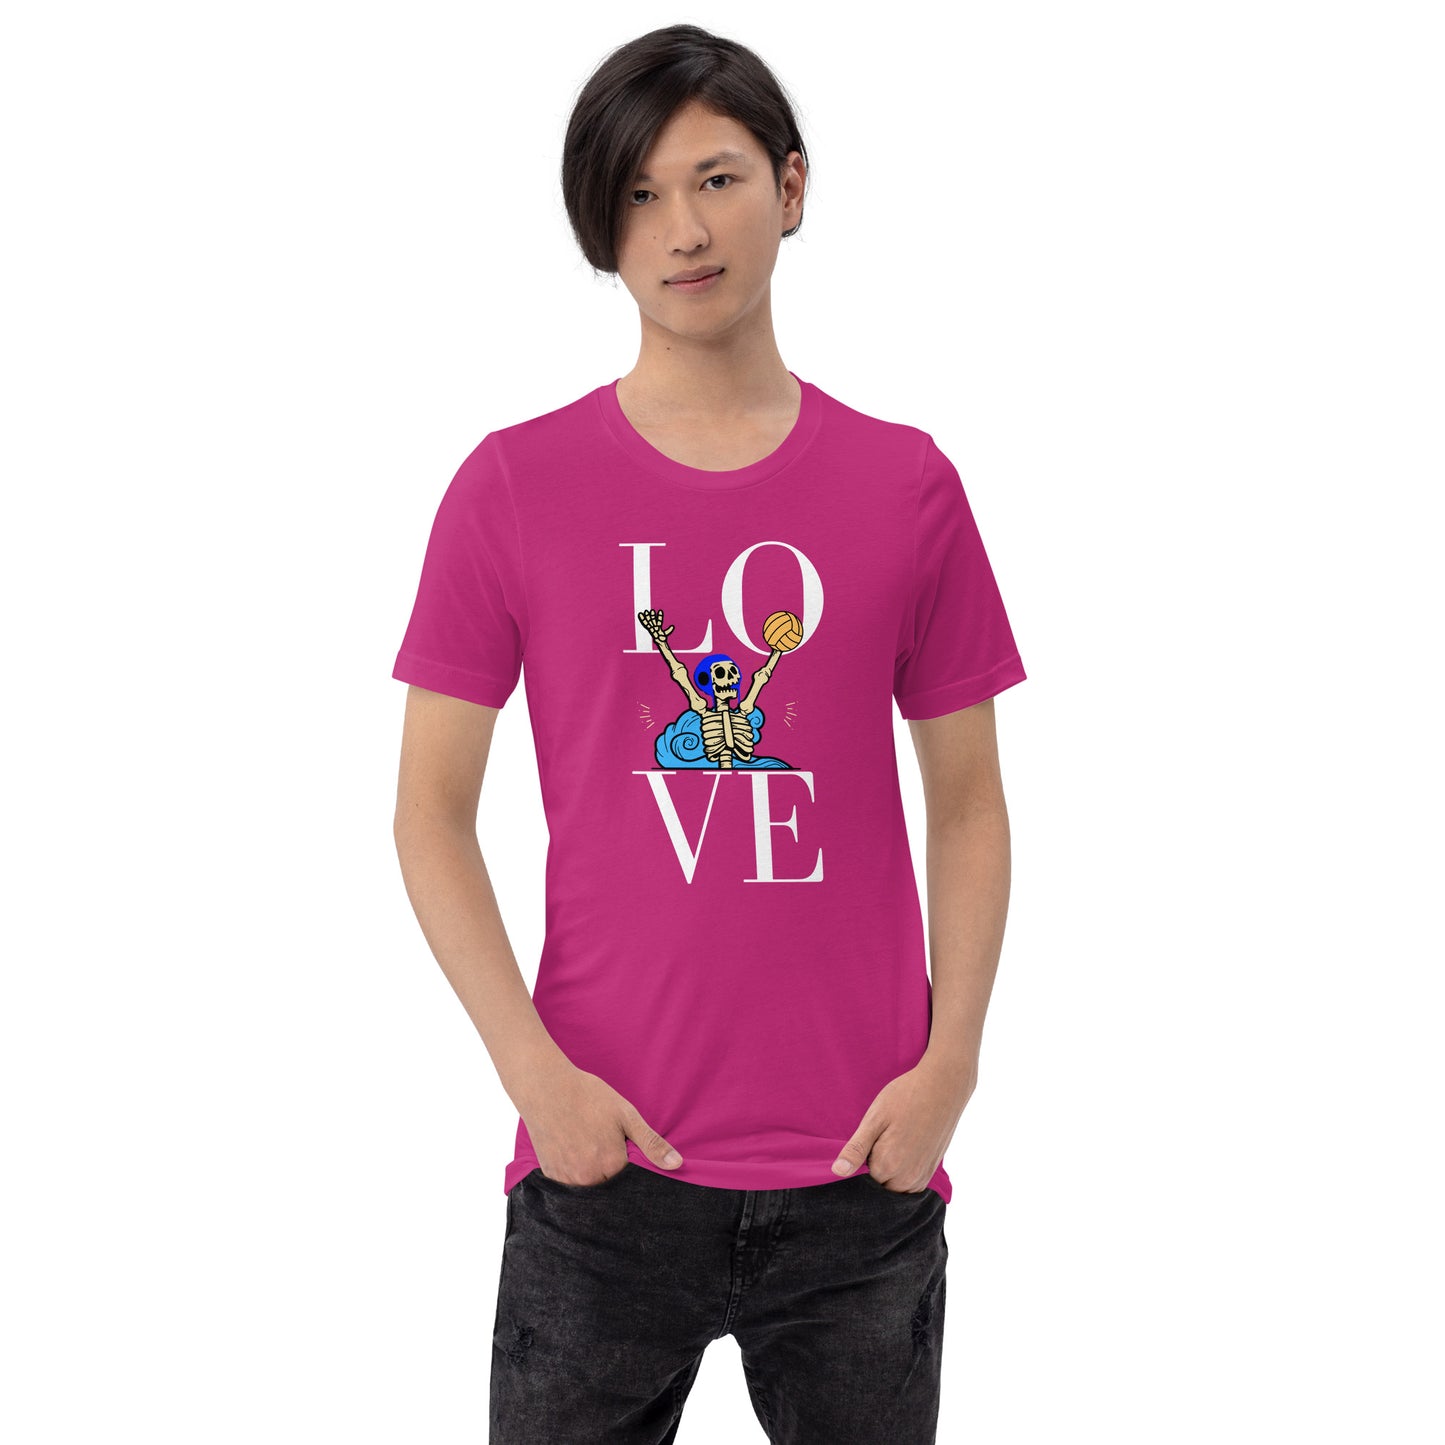 LOVE Waterpolo and Skeletons - Unisex Soft T-shirt - Bella Canvas 3001